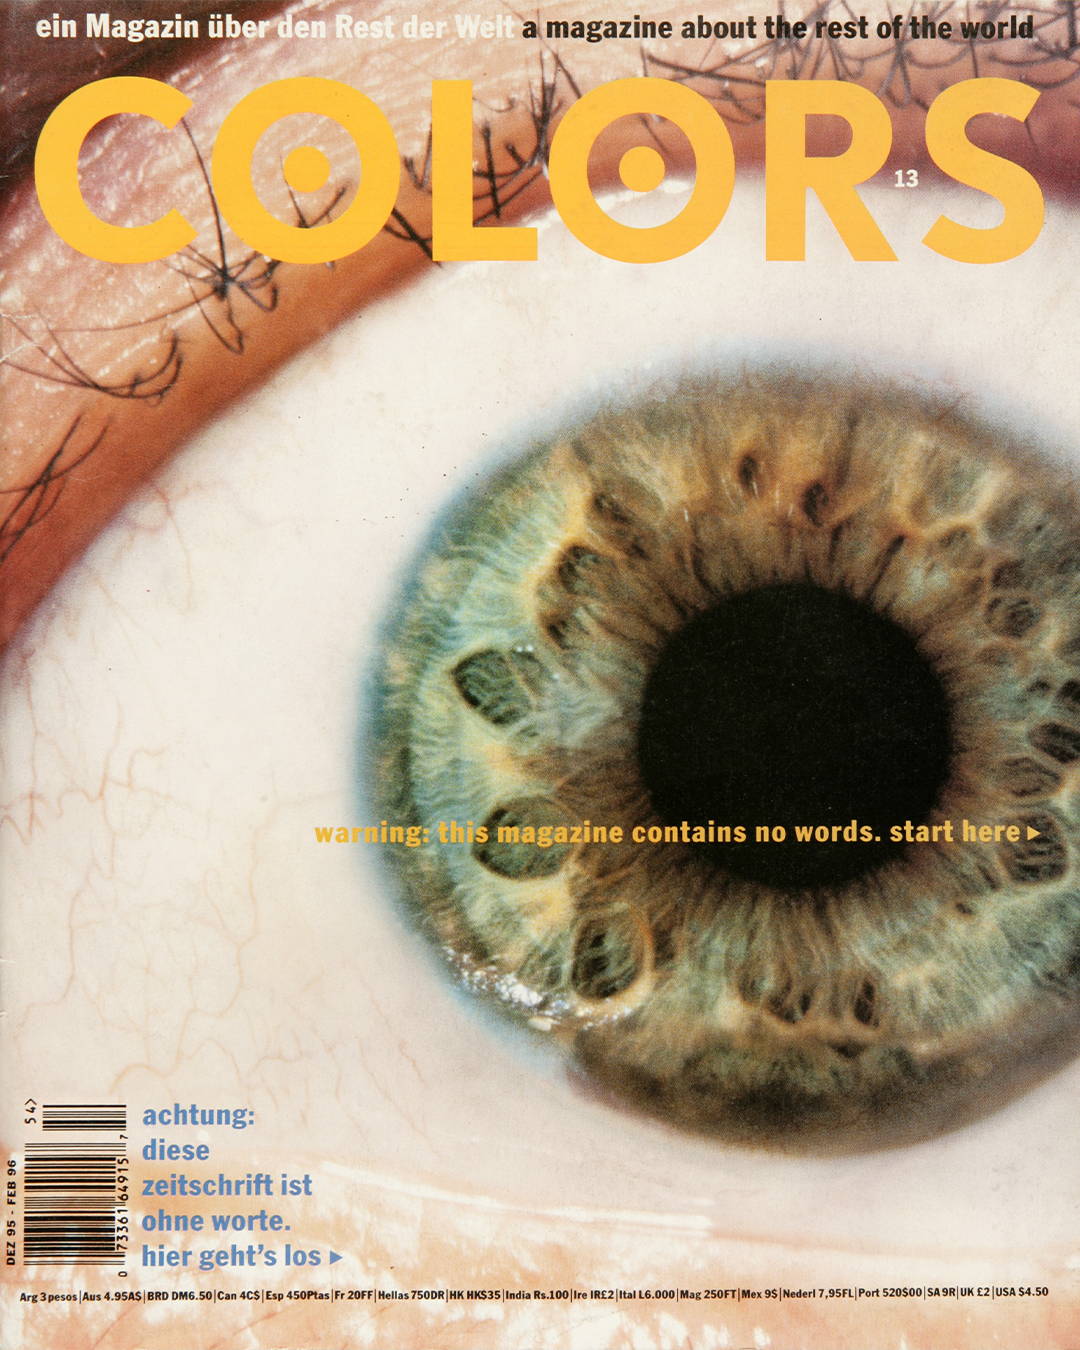 How Colors Magazine Predicted a New Visual Language